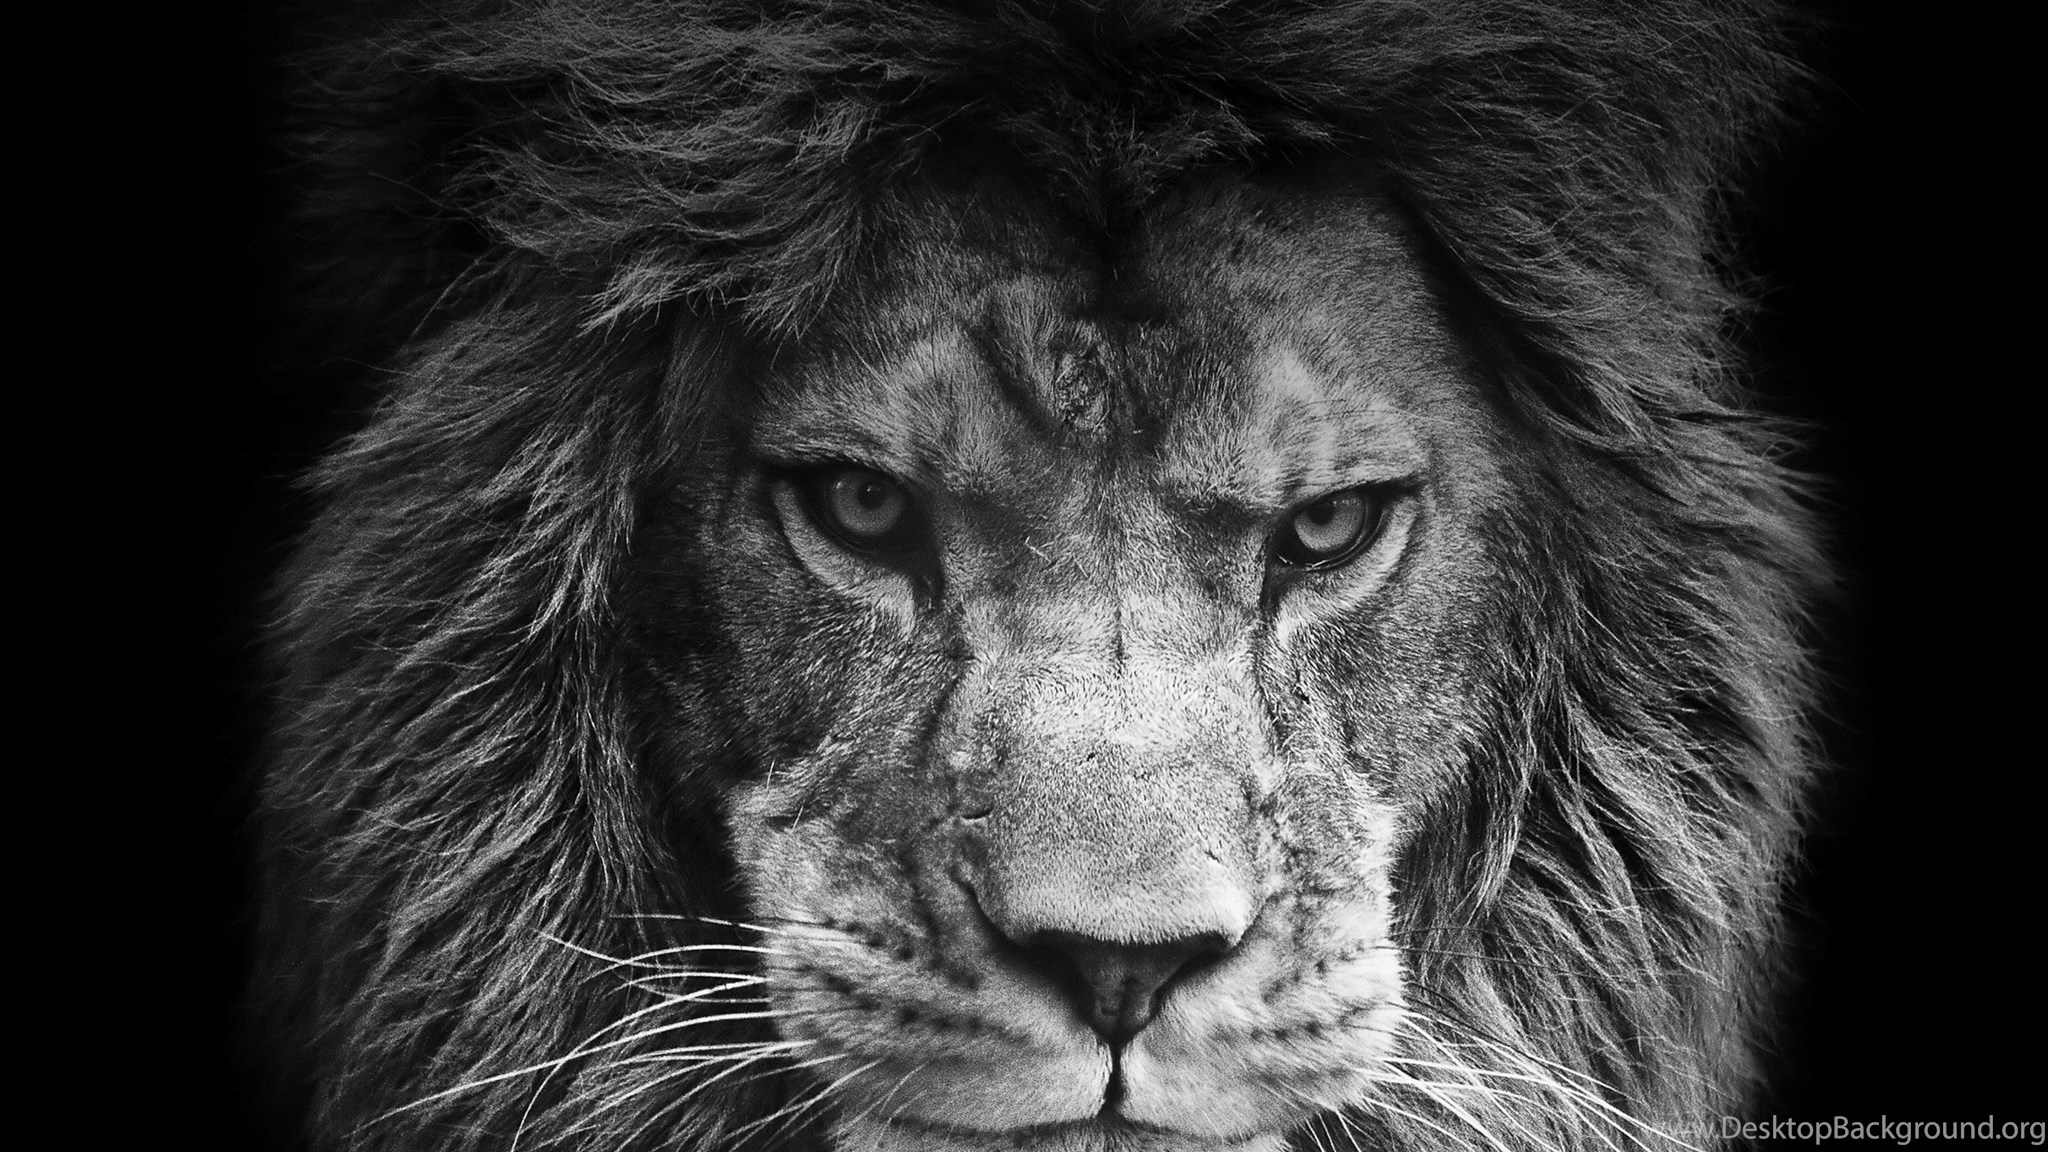 Download The Black King Lion Wallpapers ANIMALS ANIMALS Widescreen Dual Scr...